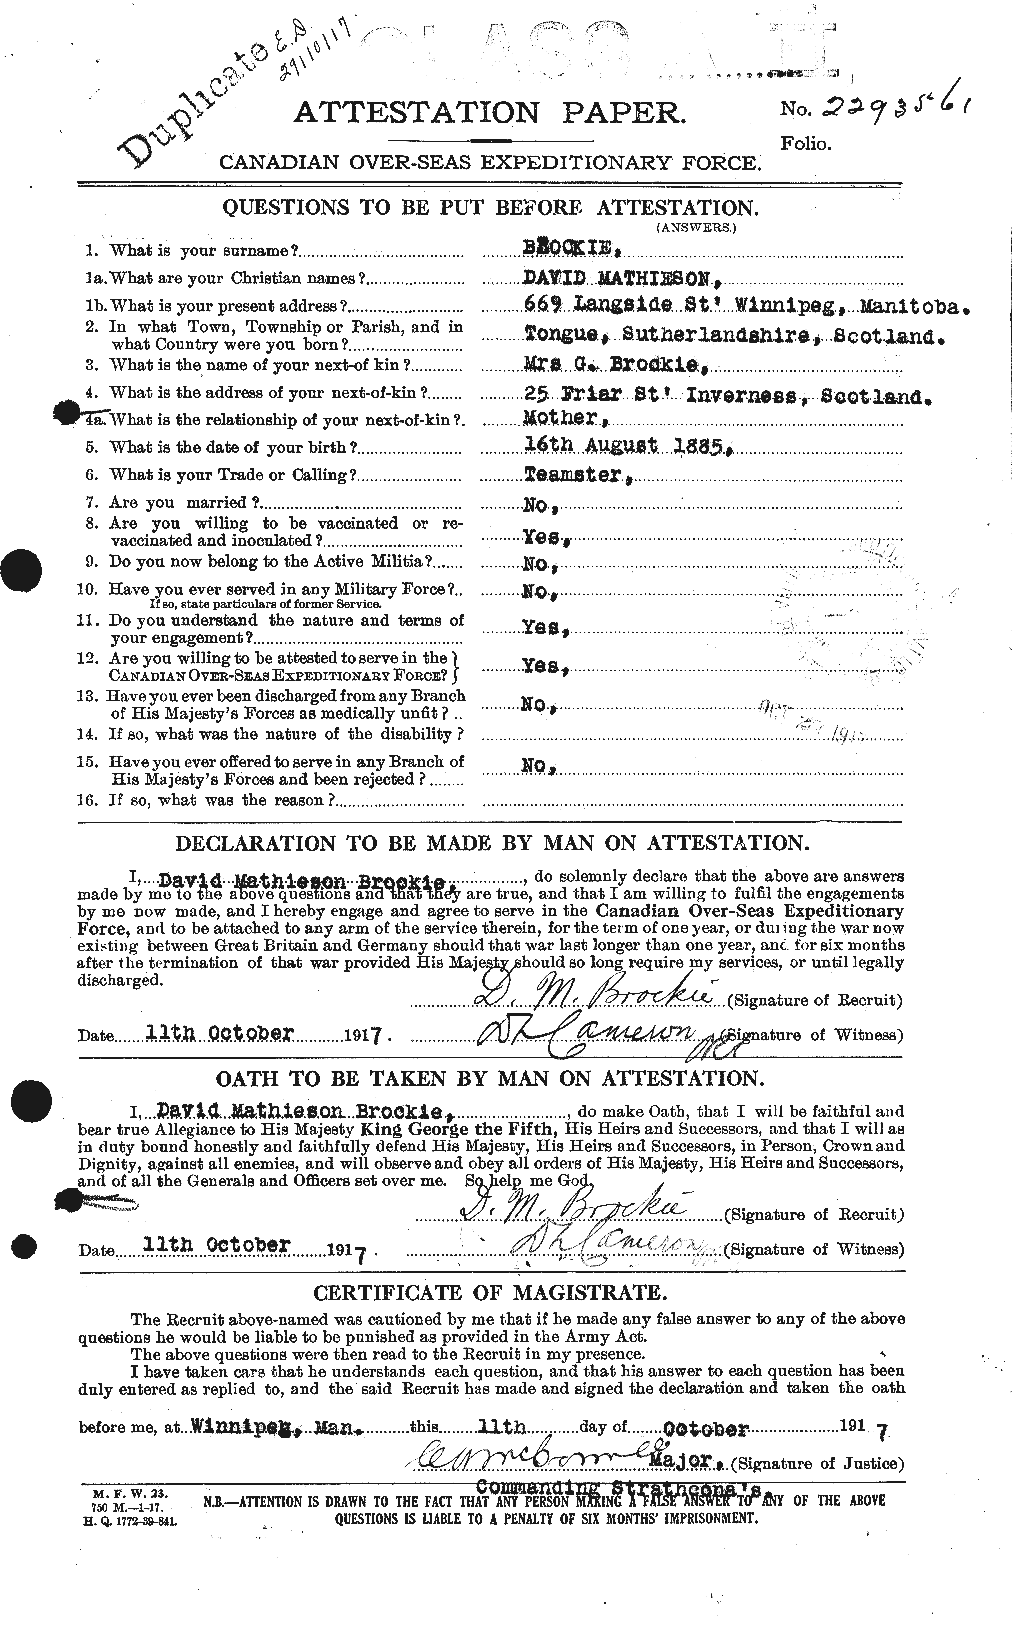 Personnel Records of the First World War - CEF 260910a